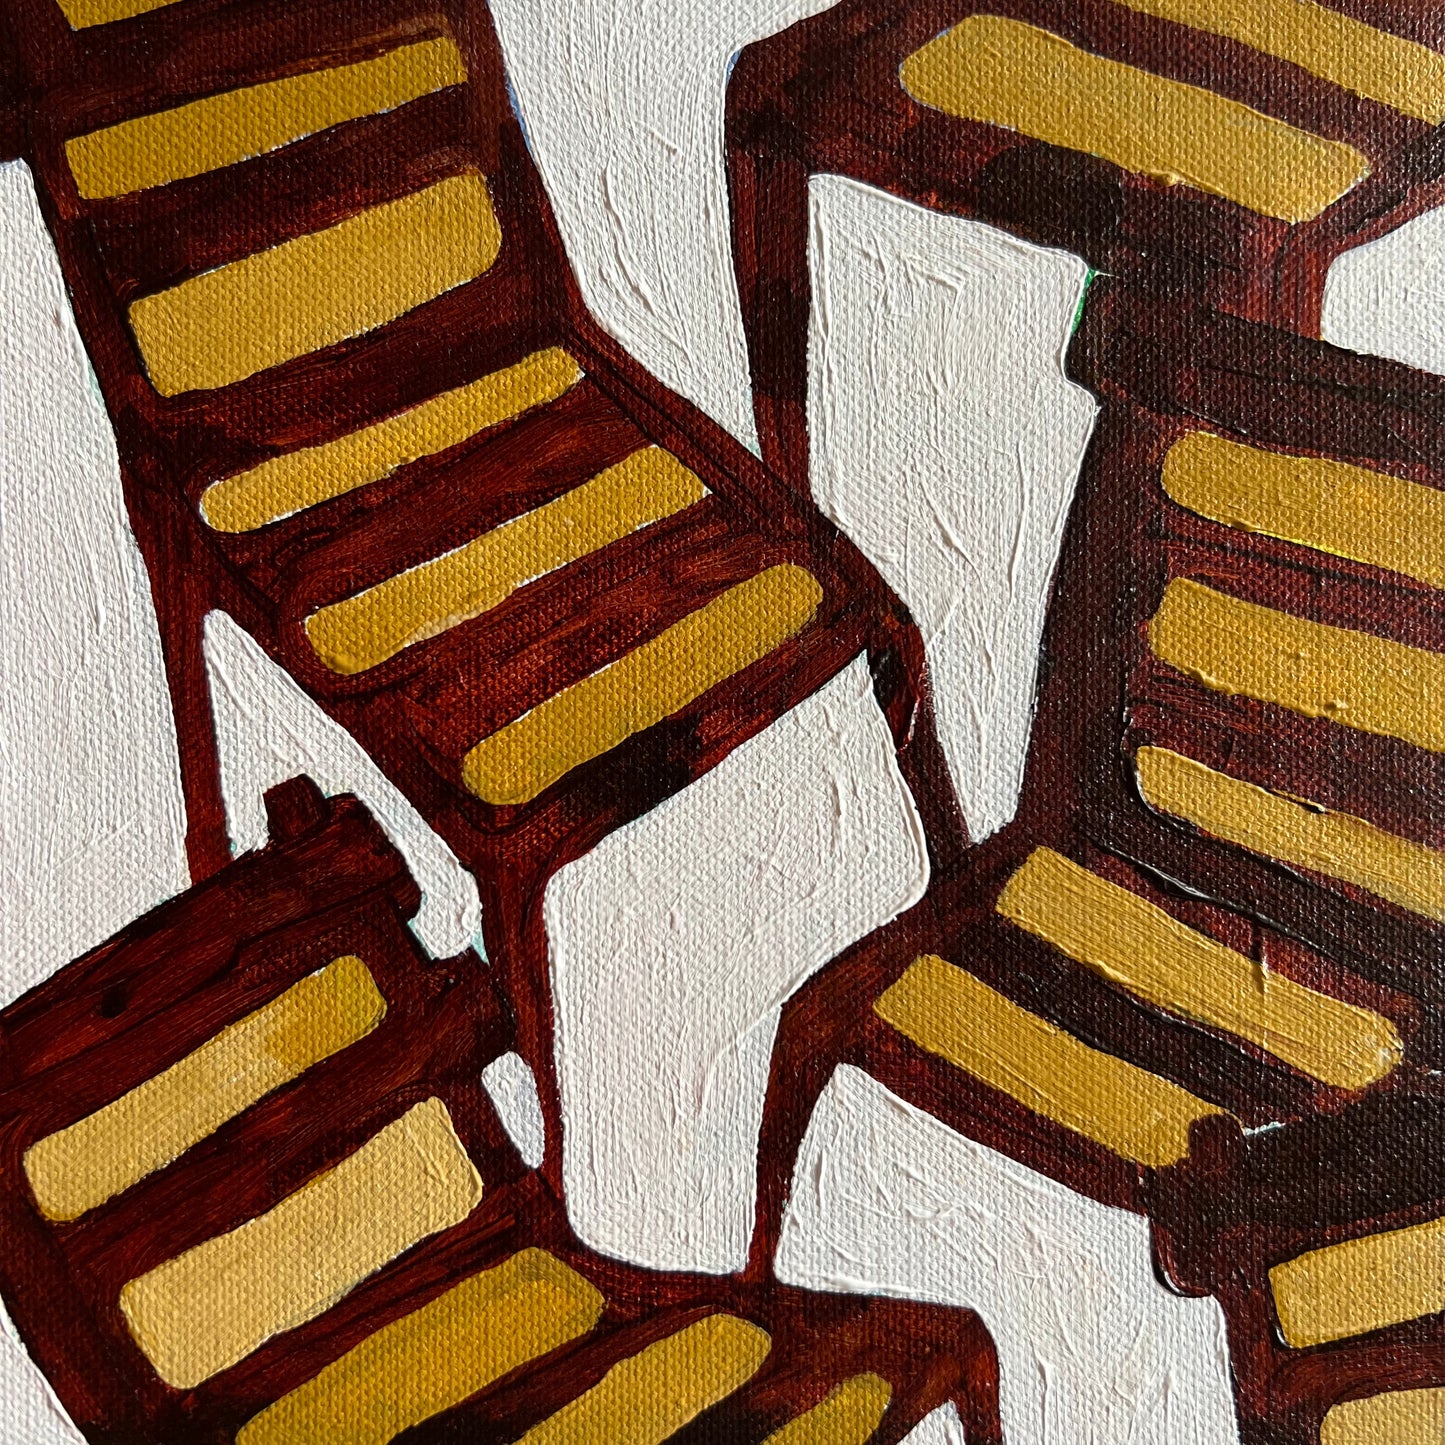 “Street chairs” NOW $175